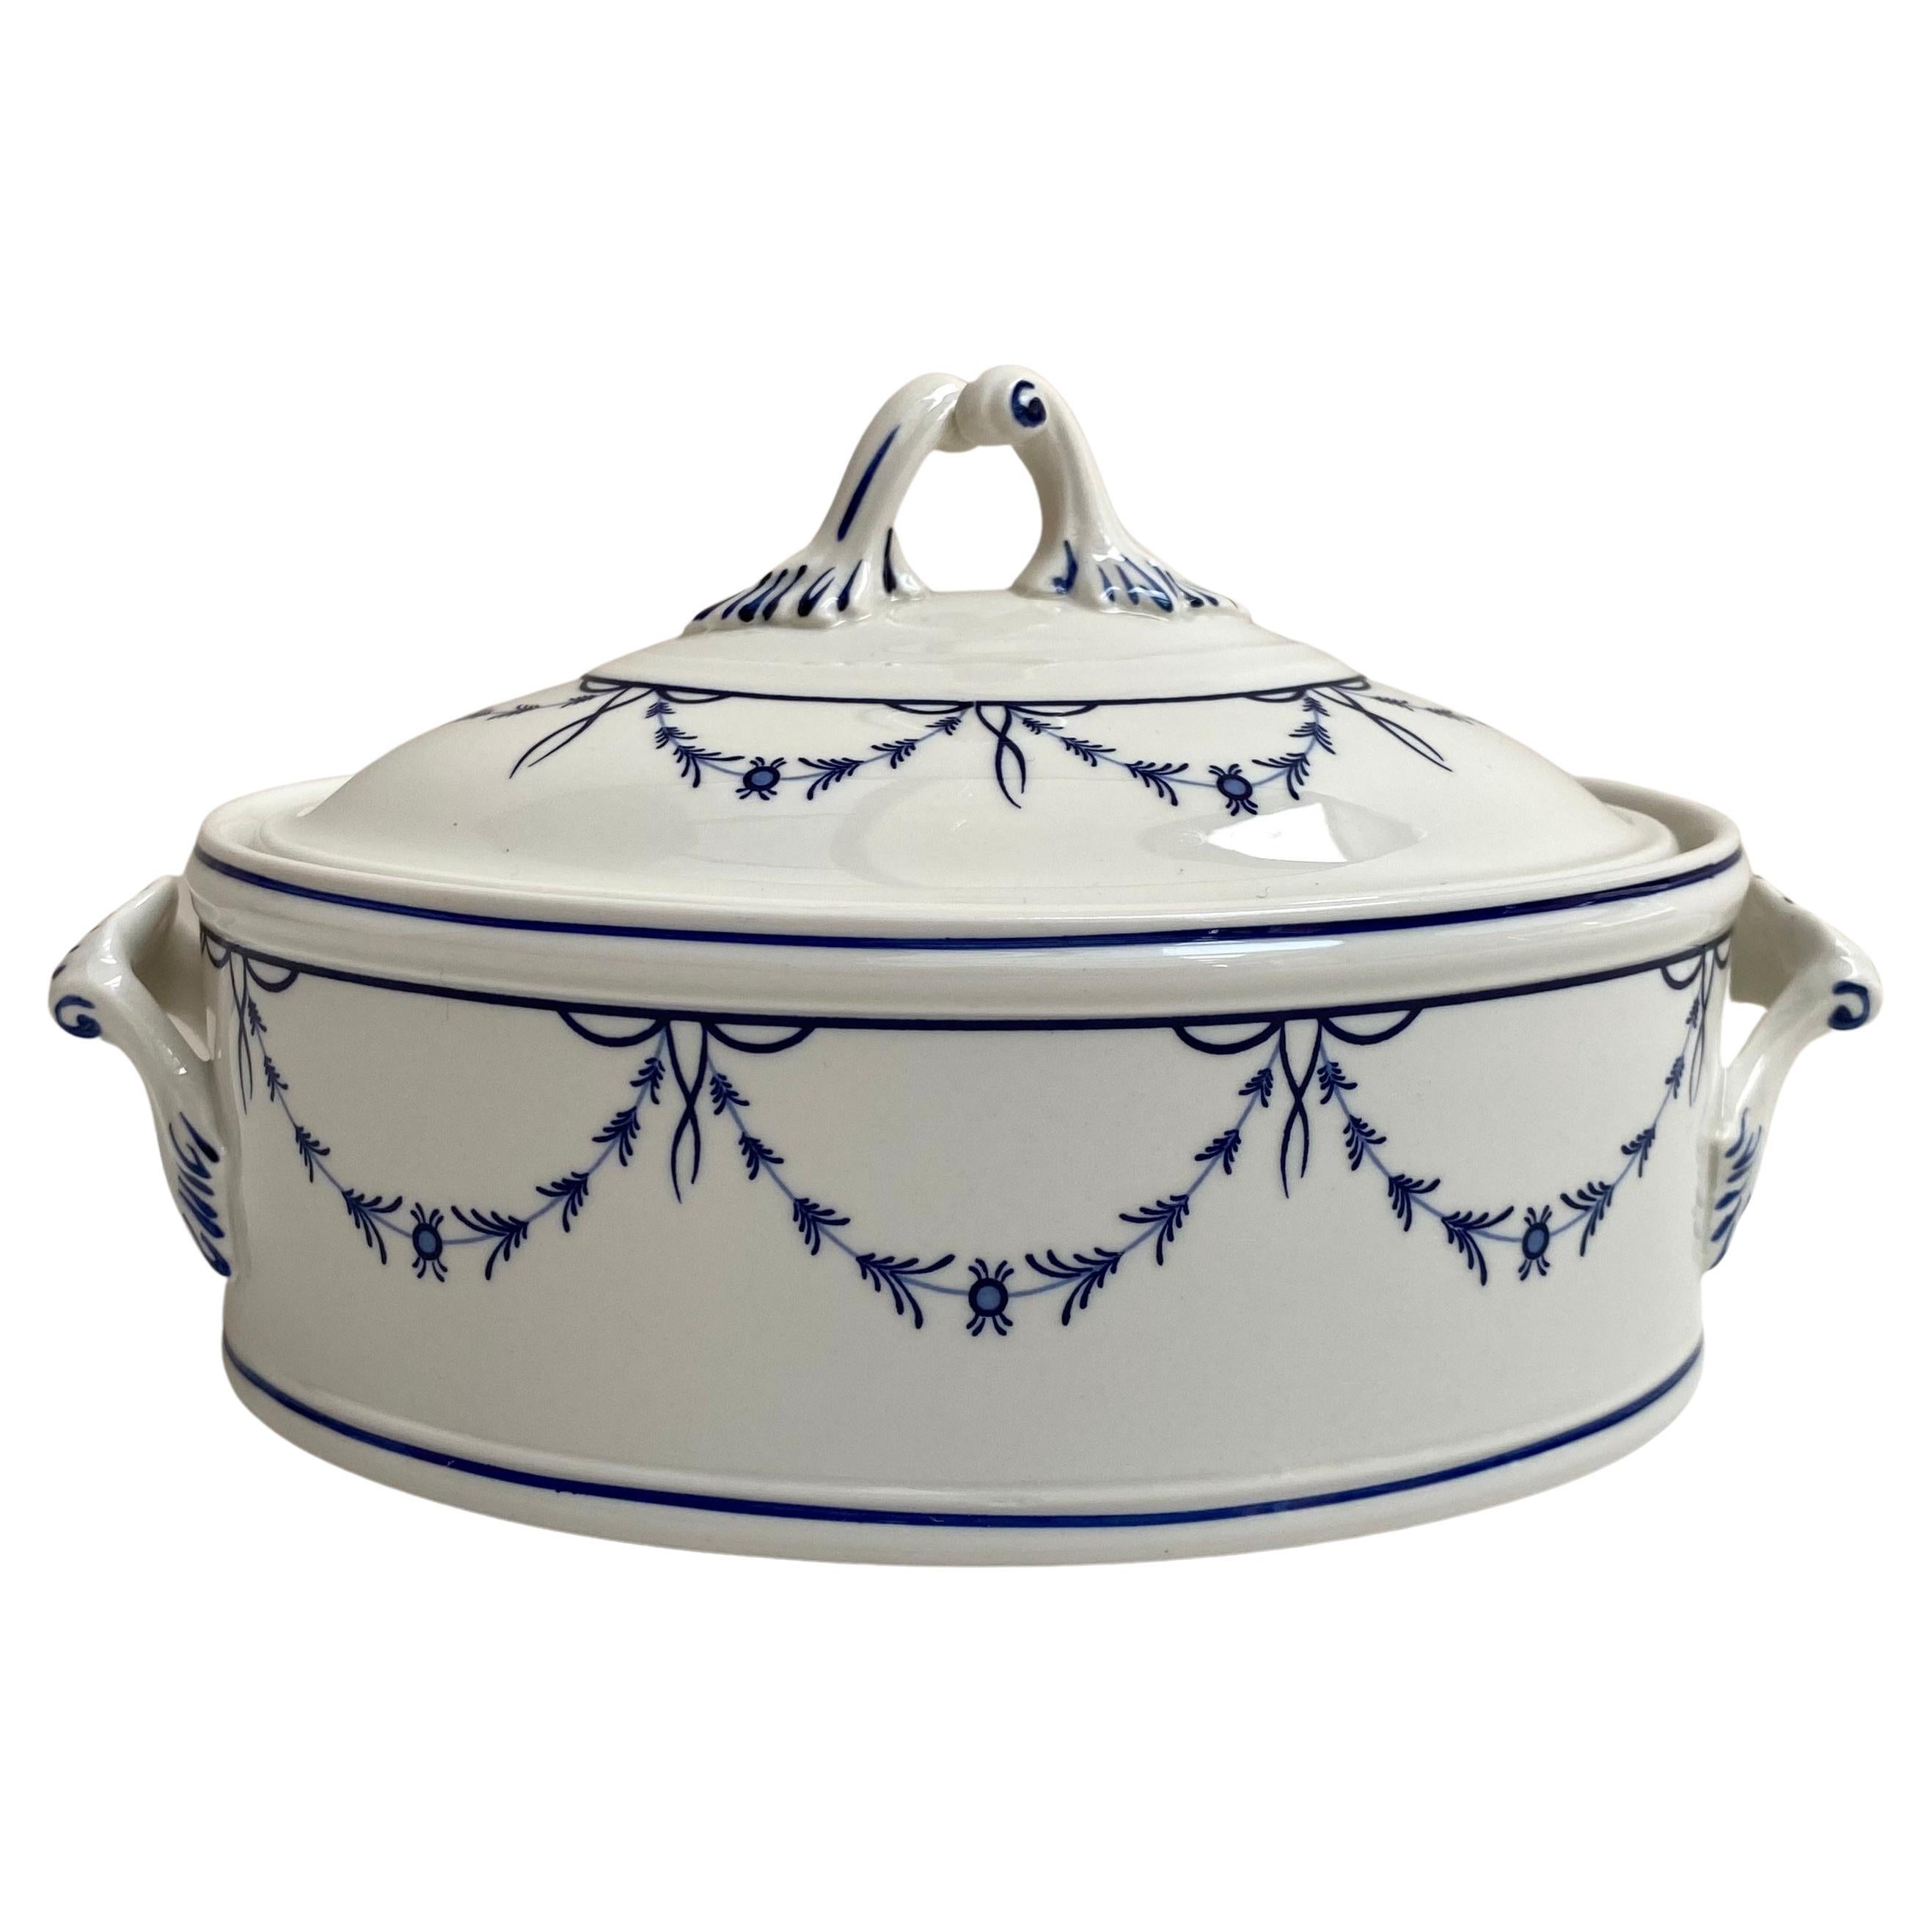 Miniature Oval Tureen with Lid Vieux Septfontaines Villeroy & Boch, Candy Bowl For Sale